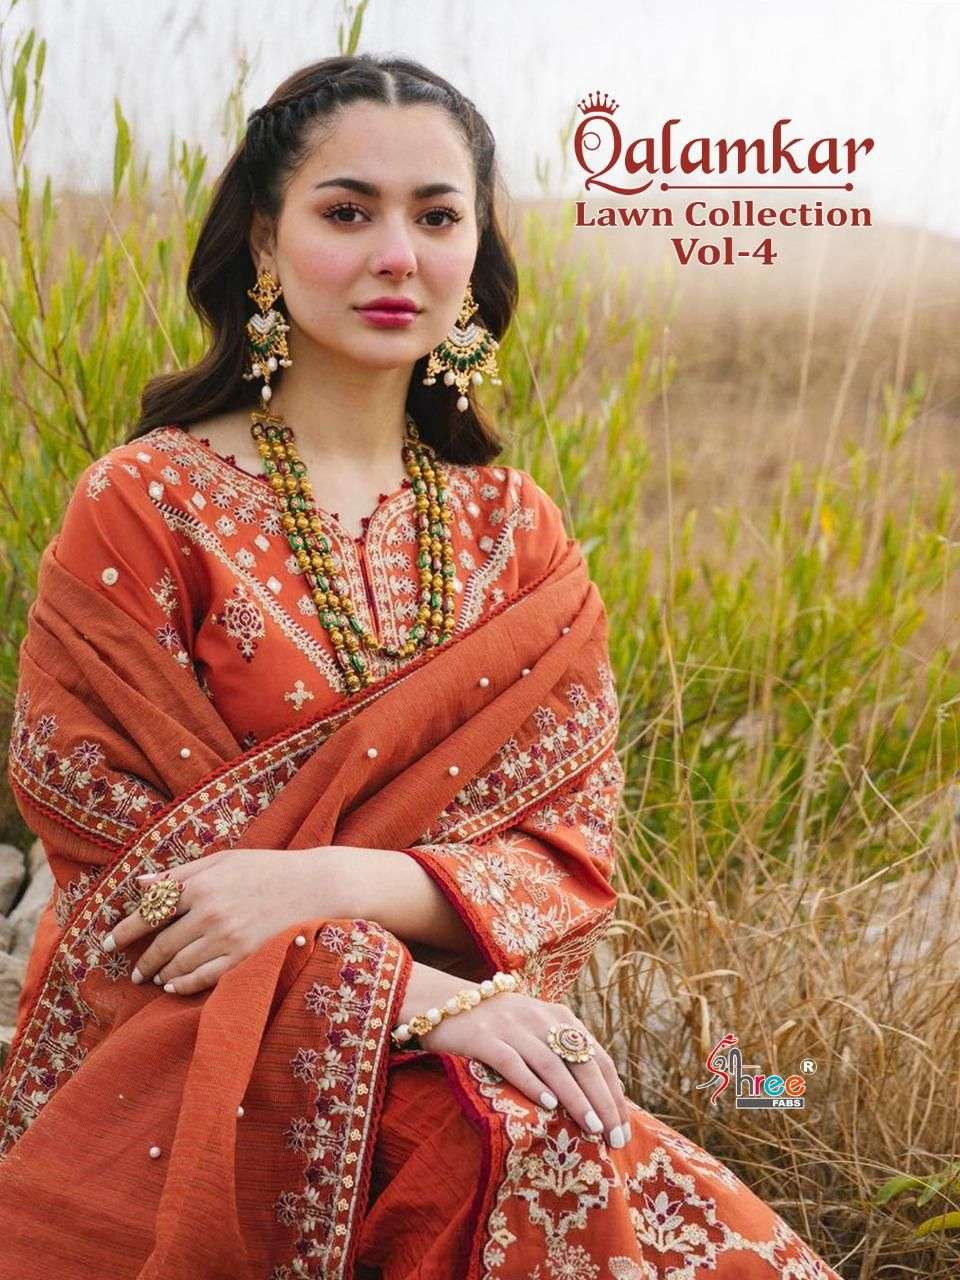 SHREE FAB QALAMKAR LAWN COLLECTION VOL 4 DESIGNER EXCLUSIVE SELF EMBROIDERY LAWN COTTON SUIT IN WHOLESALE RATE 